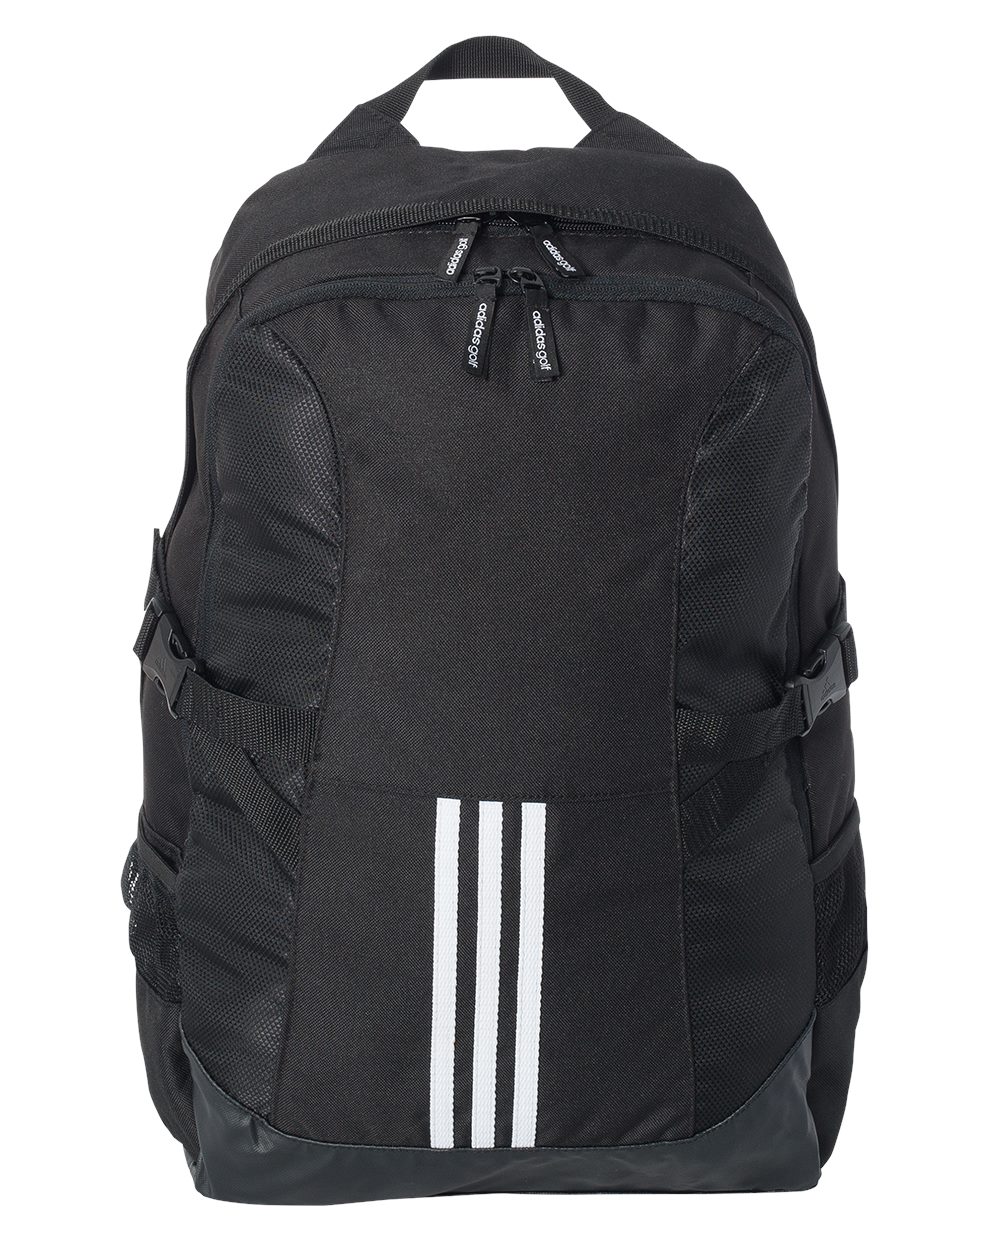 adidas 25l backpack